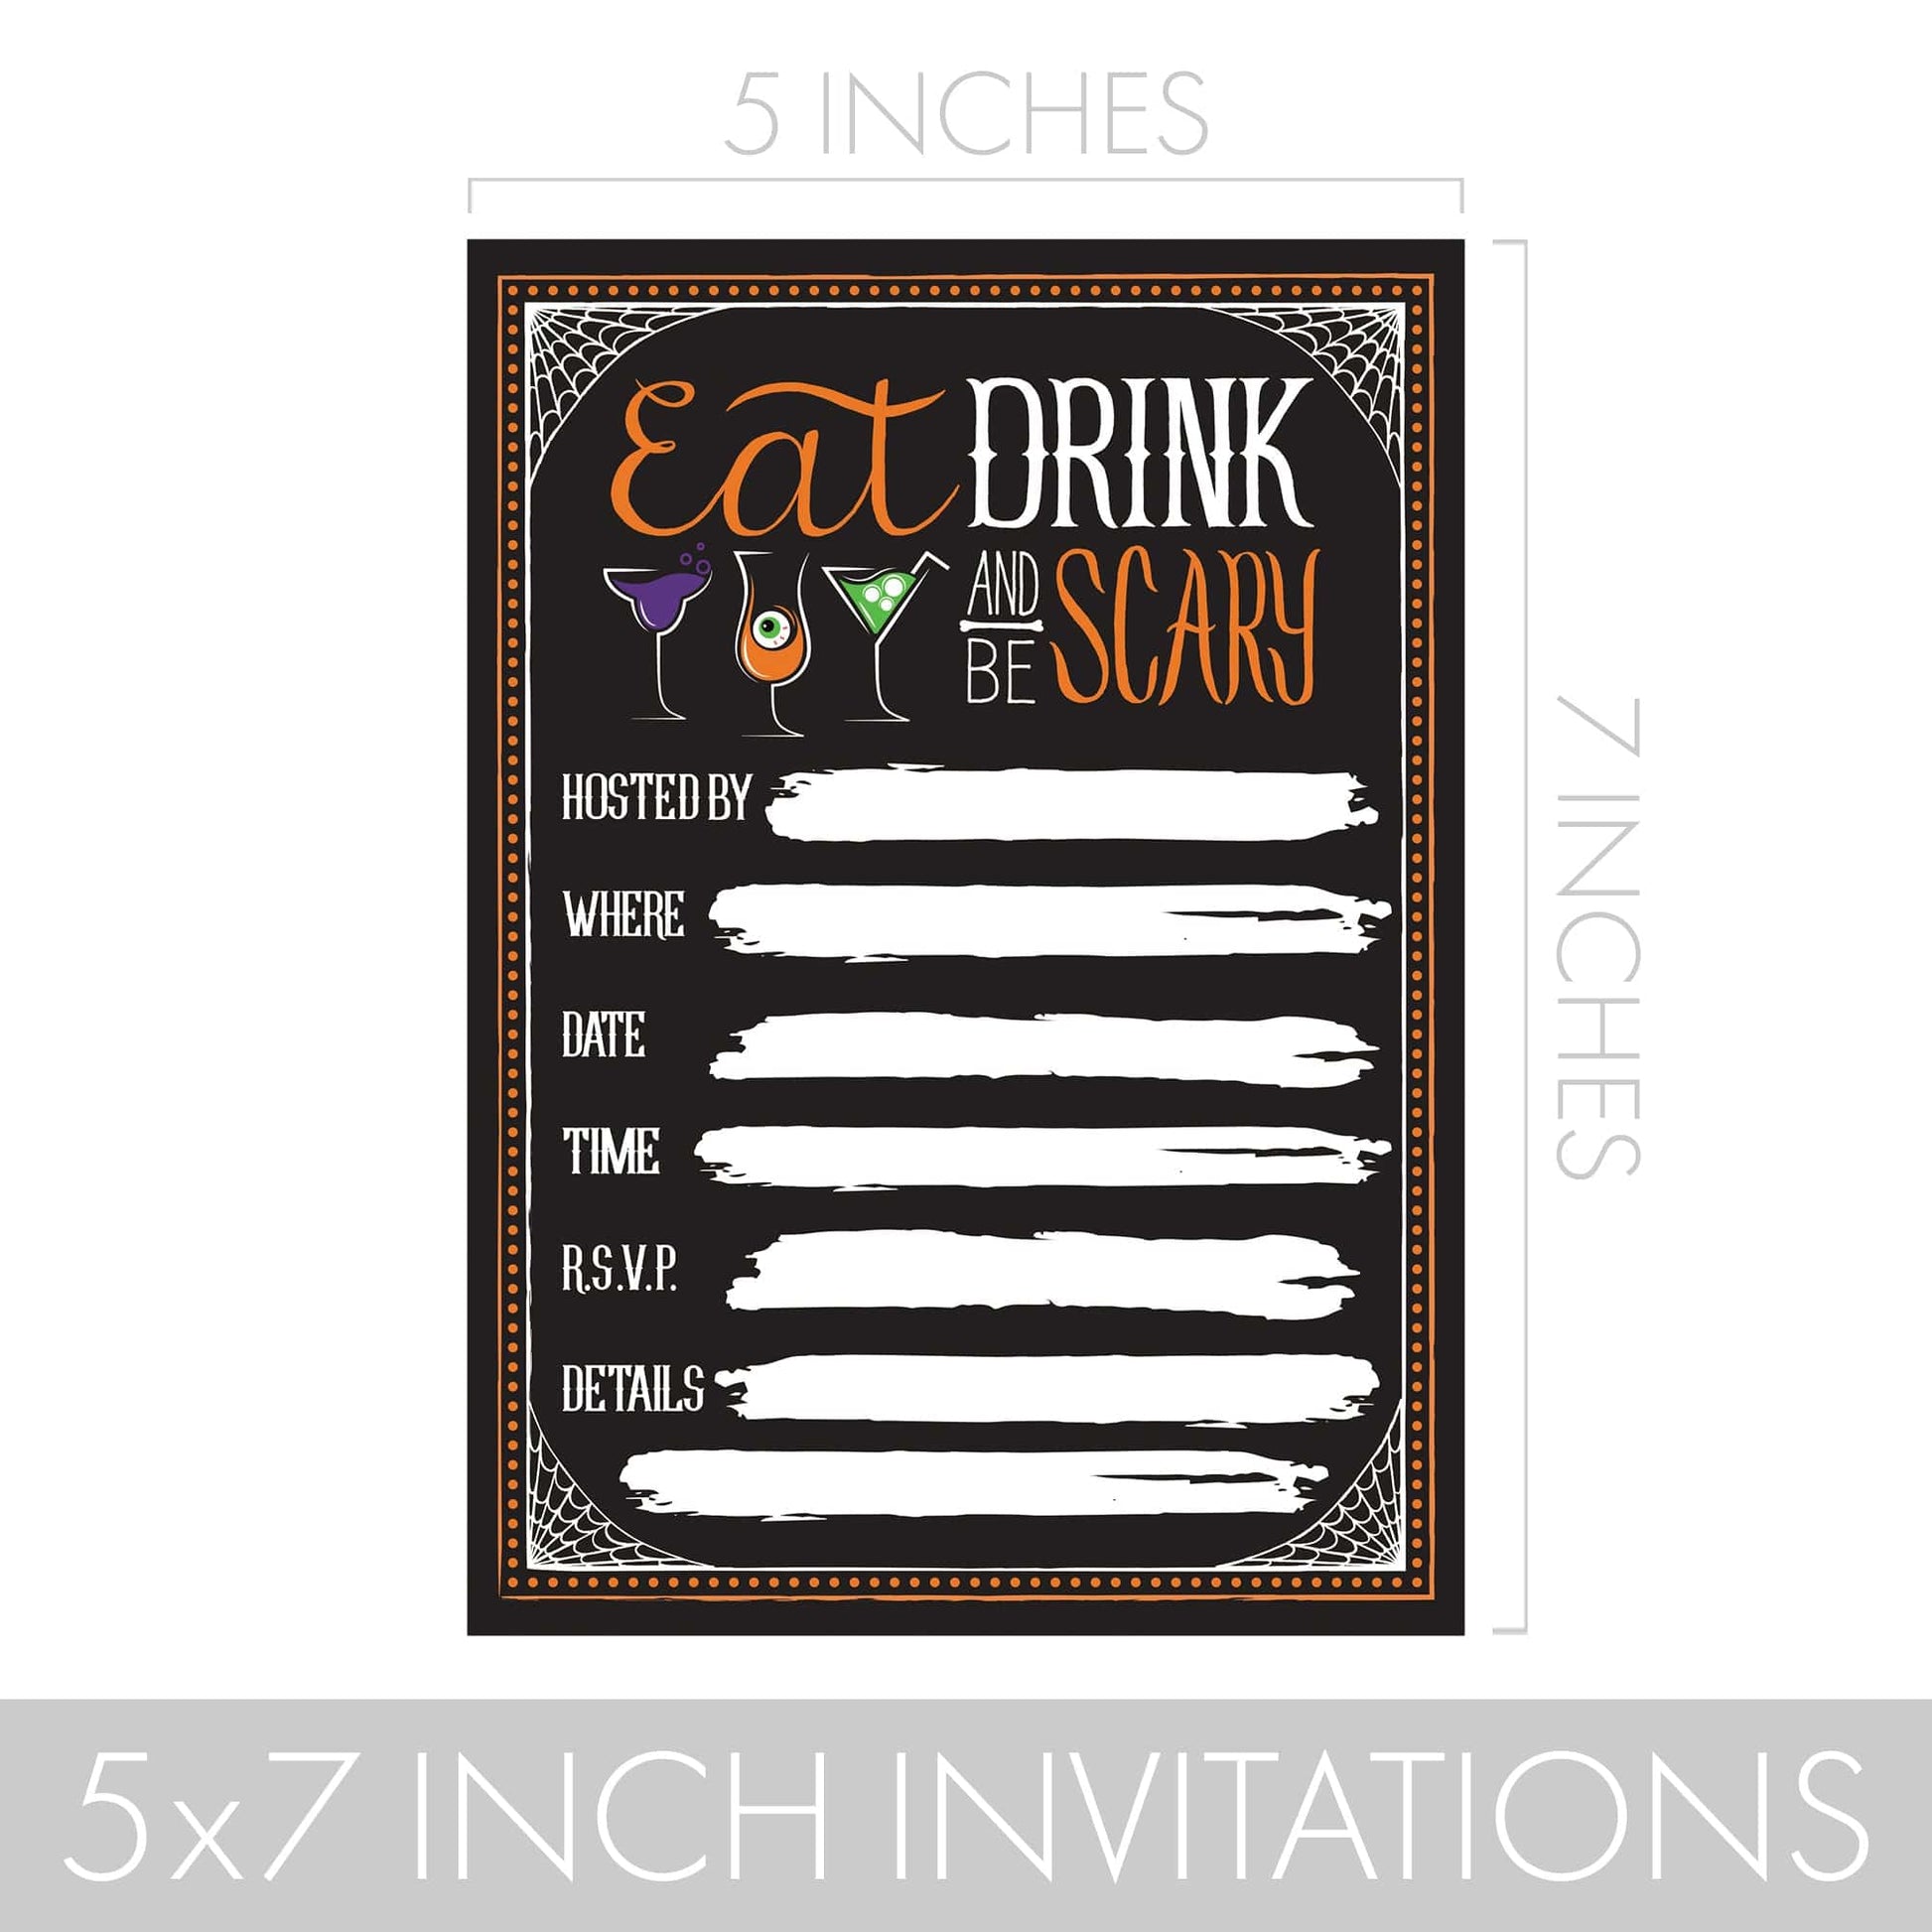 Halloween Party Invitation Cards with Envelopes | Eat, Drink, and Be Scary | 12 Count